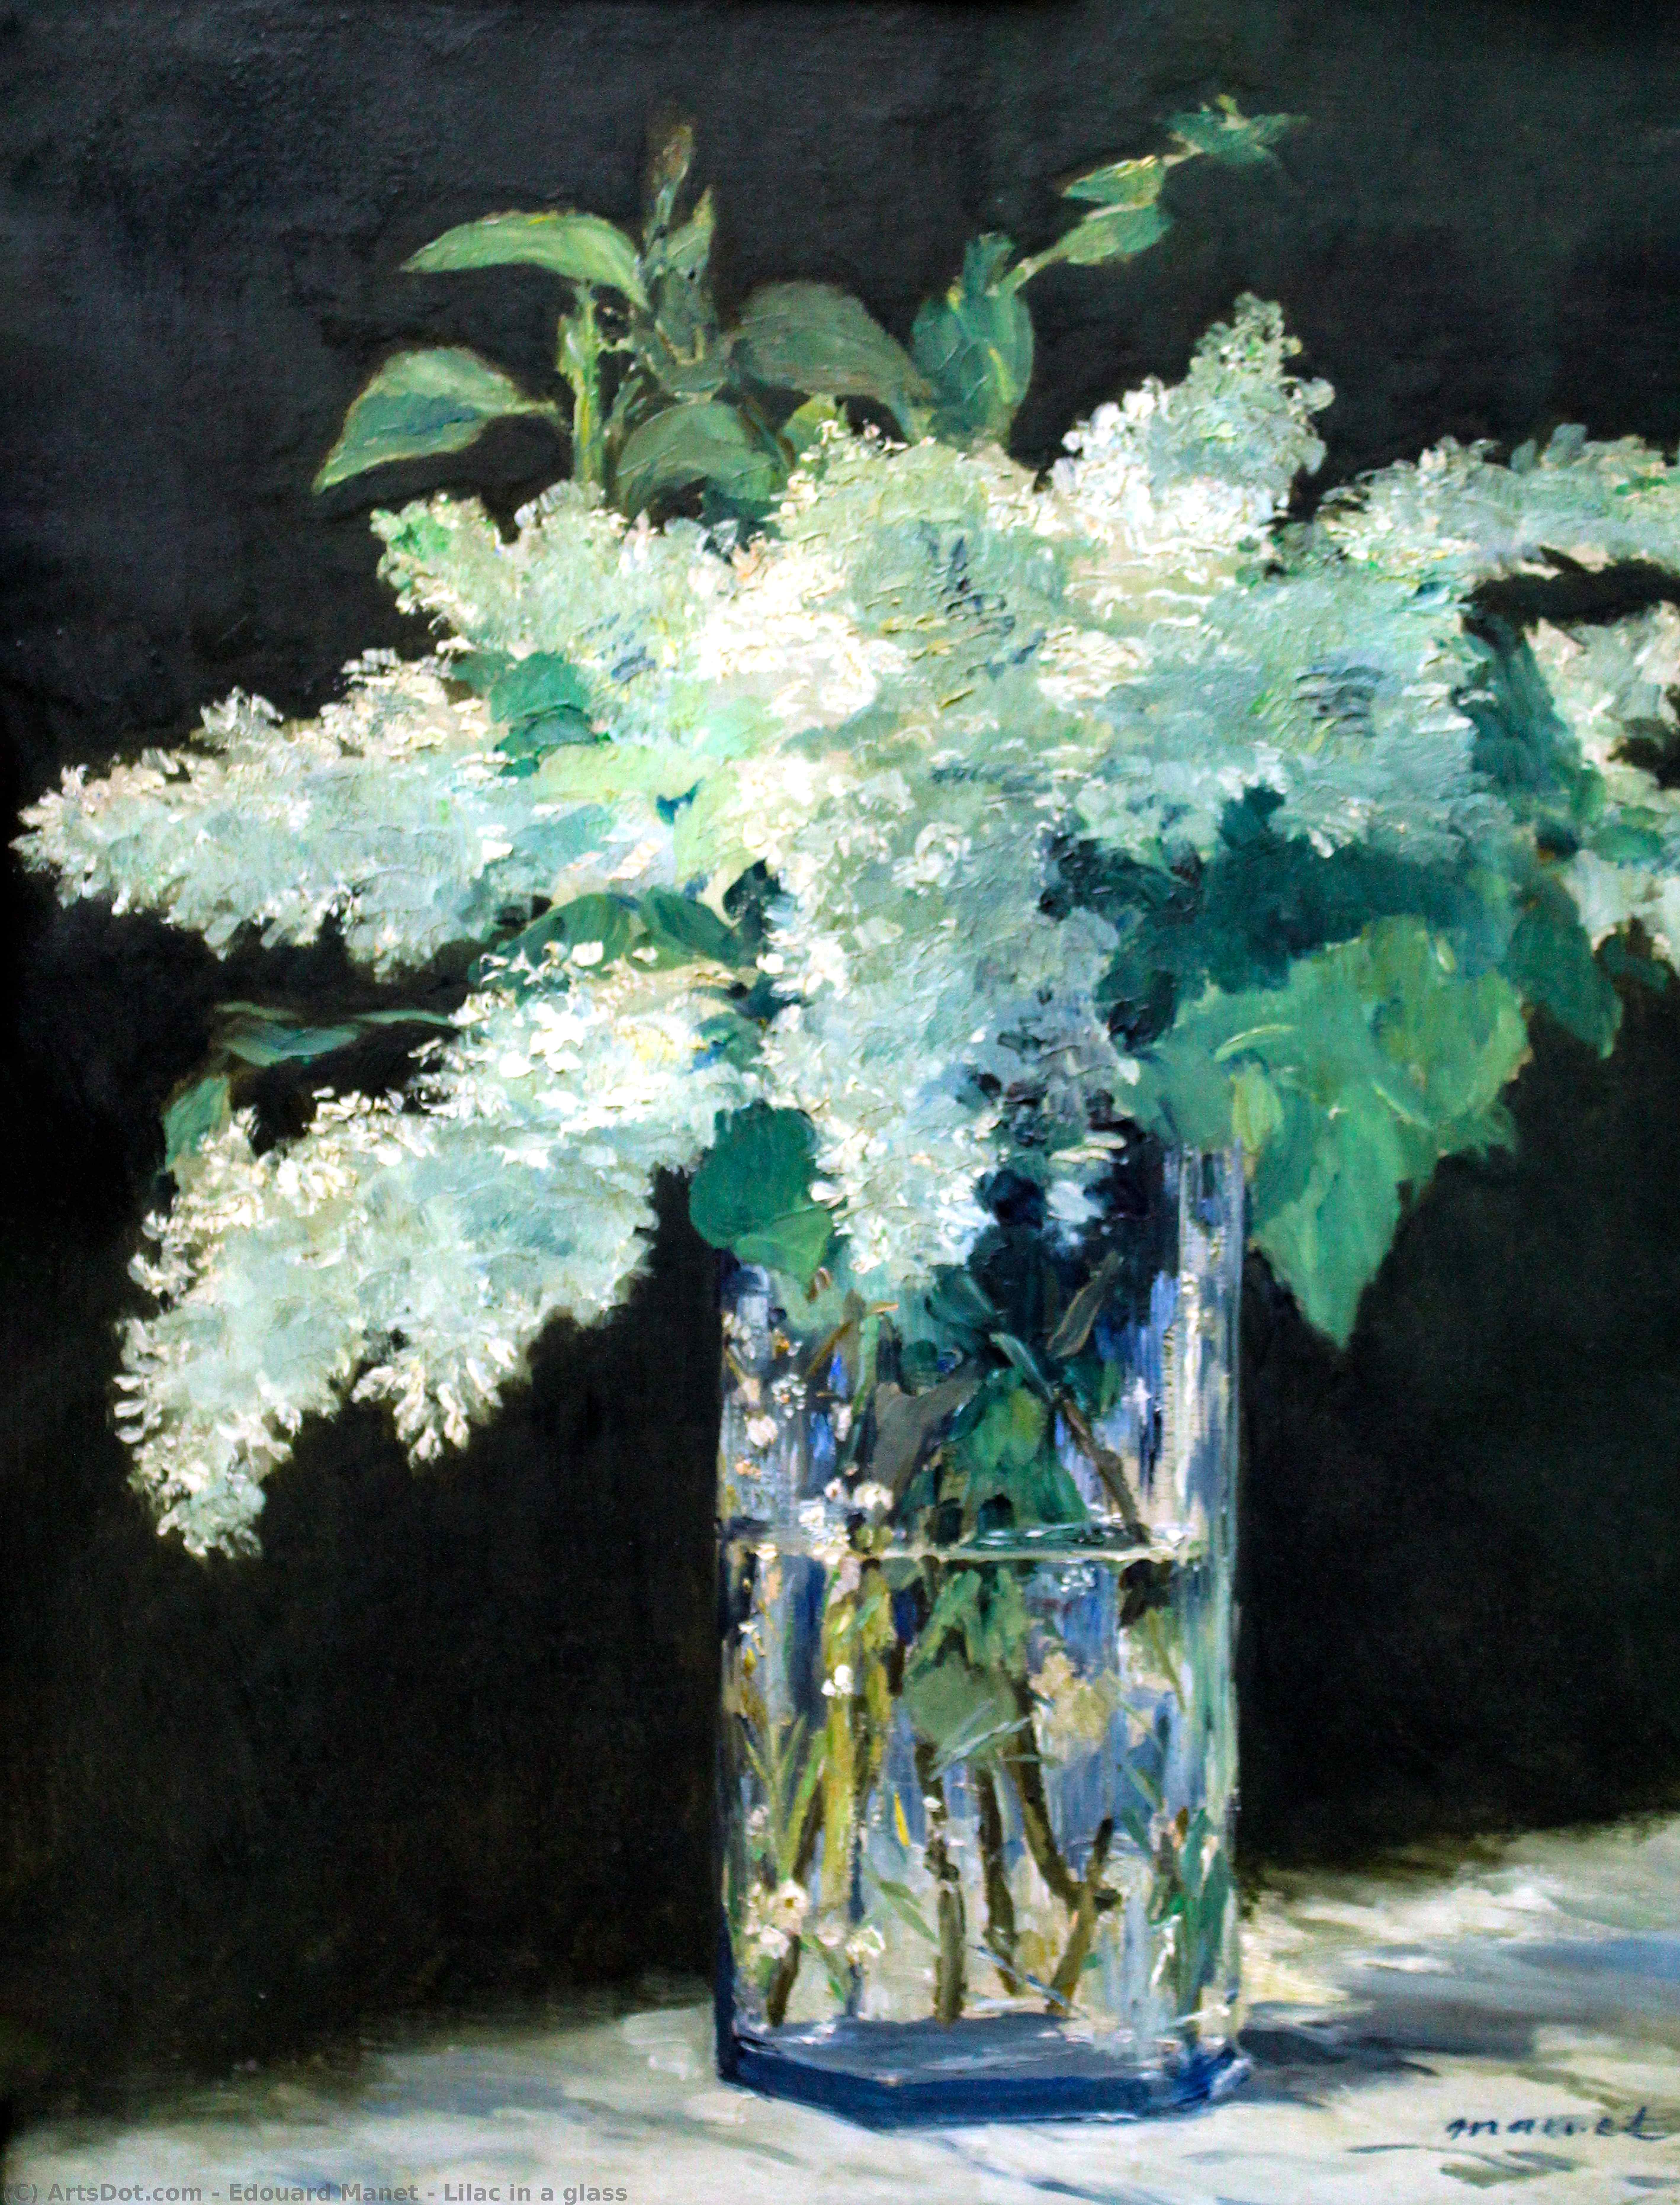 WikiOO.org - 백과 사전 - 회화, 삽화 Edouard Manet - Lilac in a glass